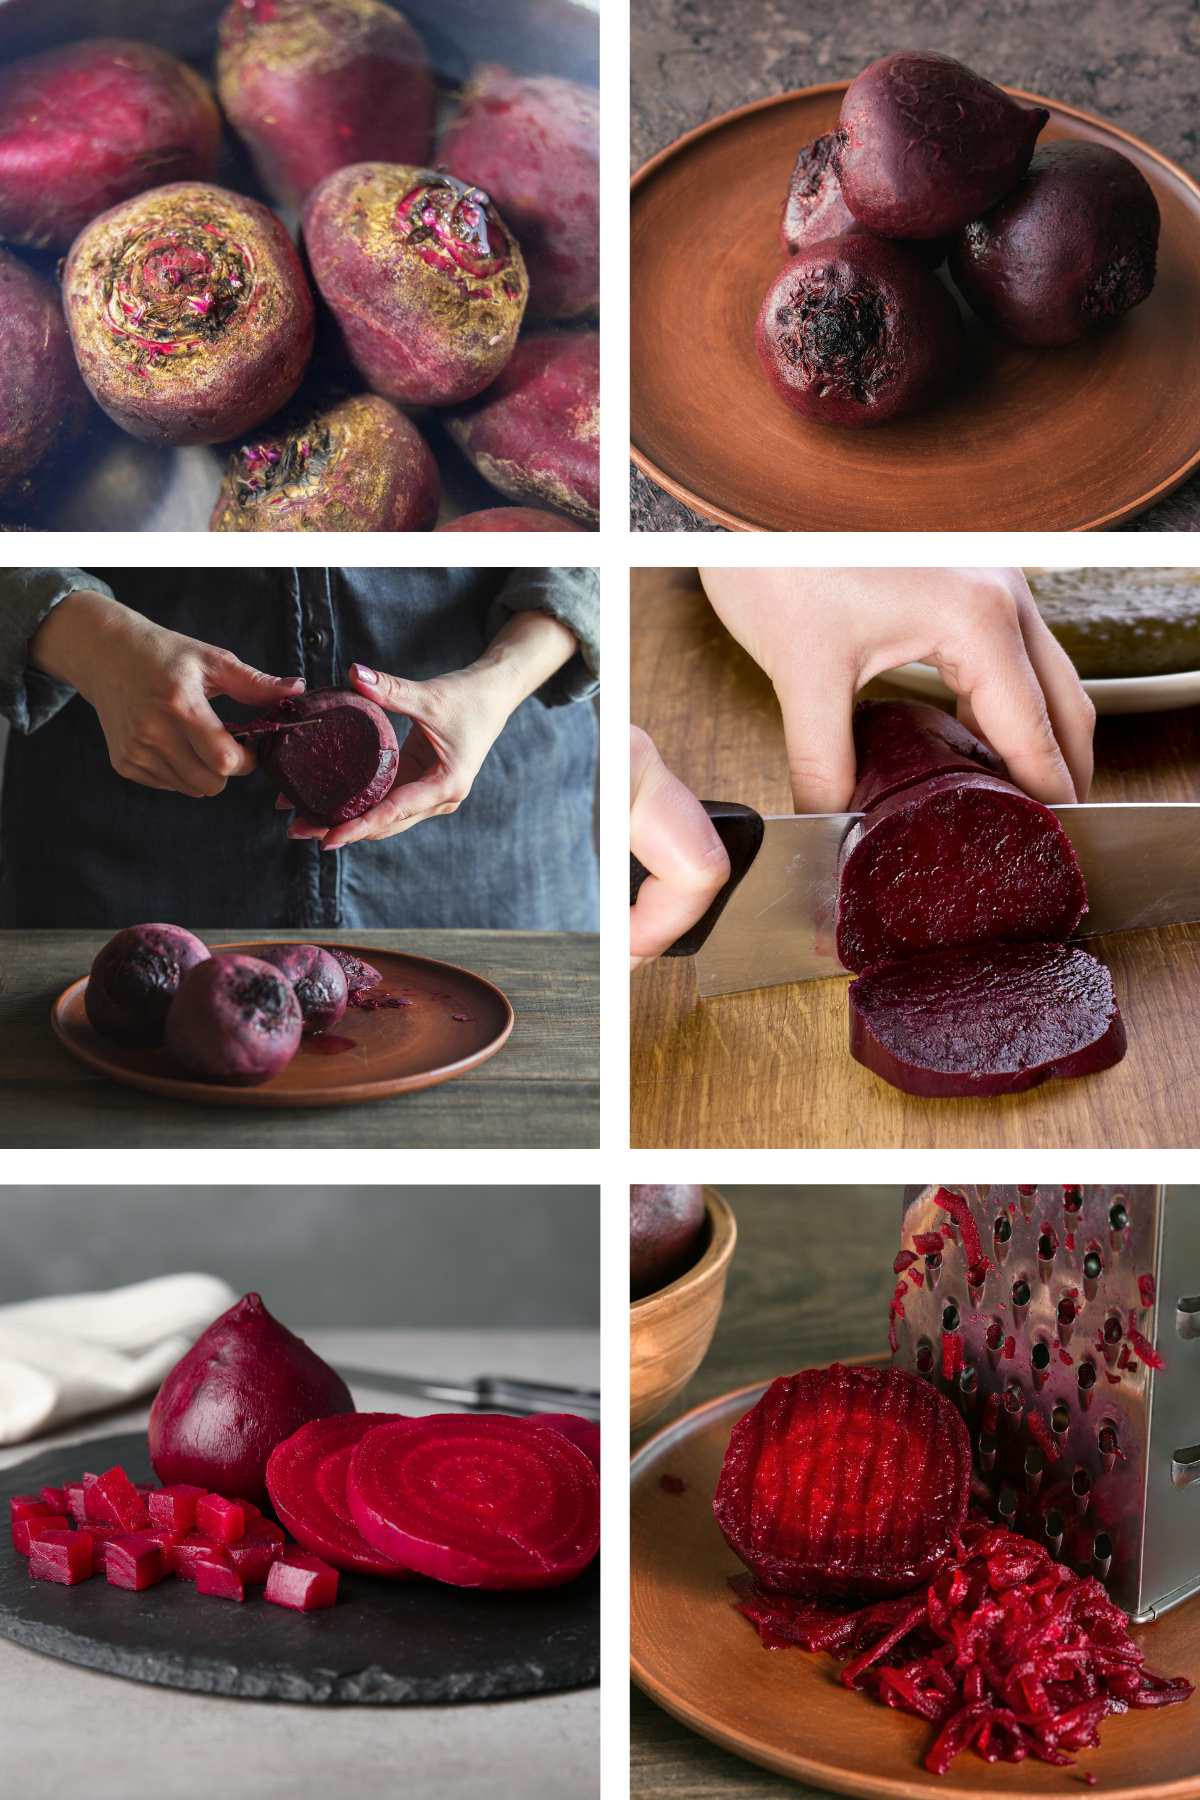 Step by step pictures of how to boil beets for baby, how to peel and cut after boiling.